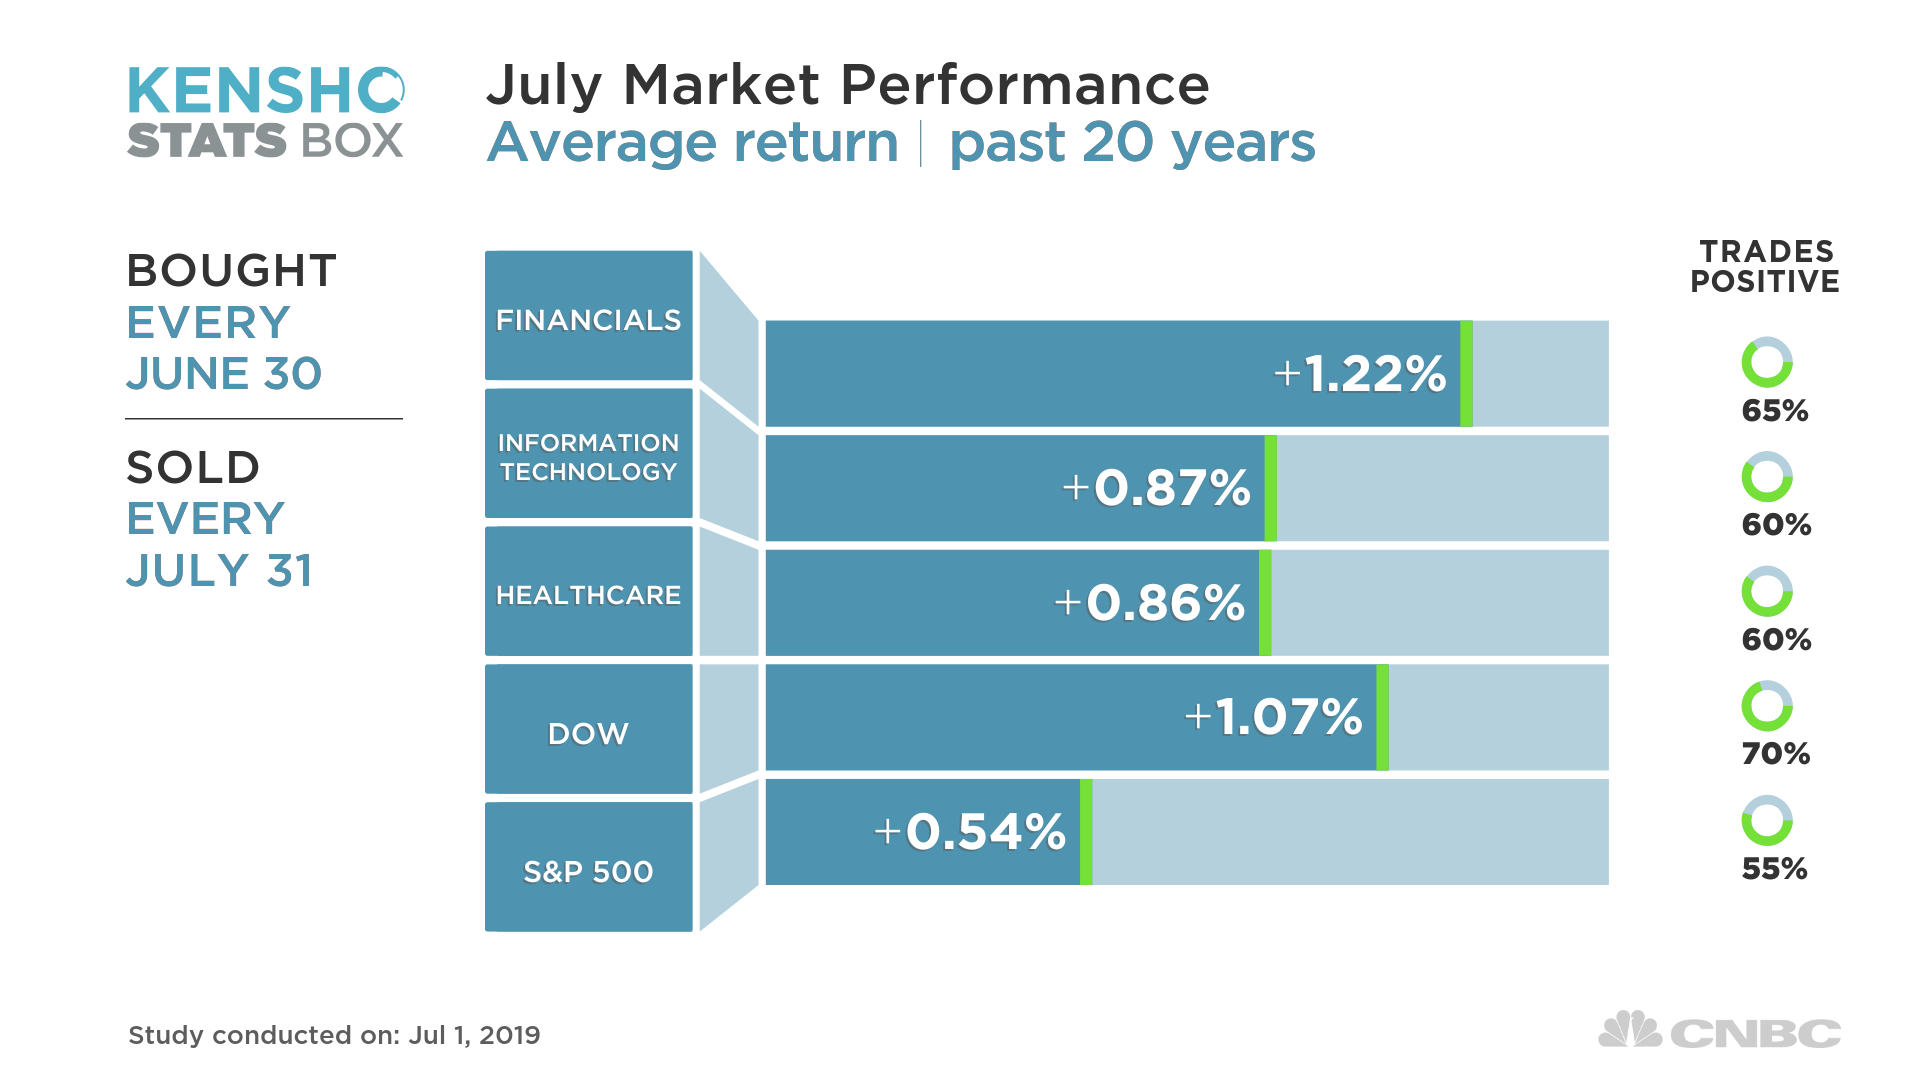 Why stocks can rally in July past weakest earnings since 2006